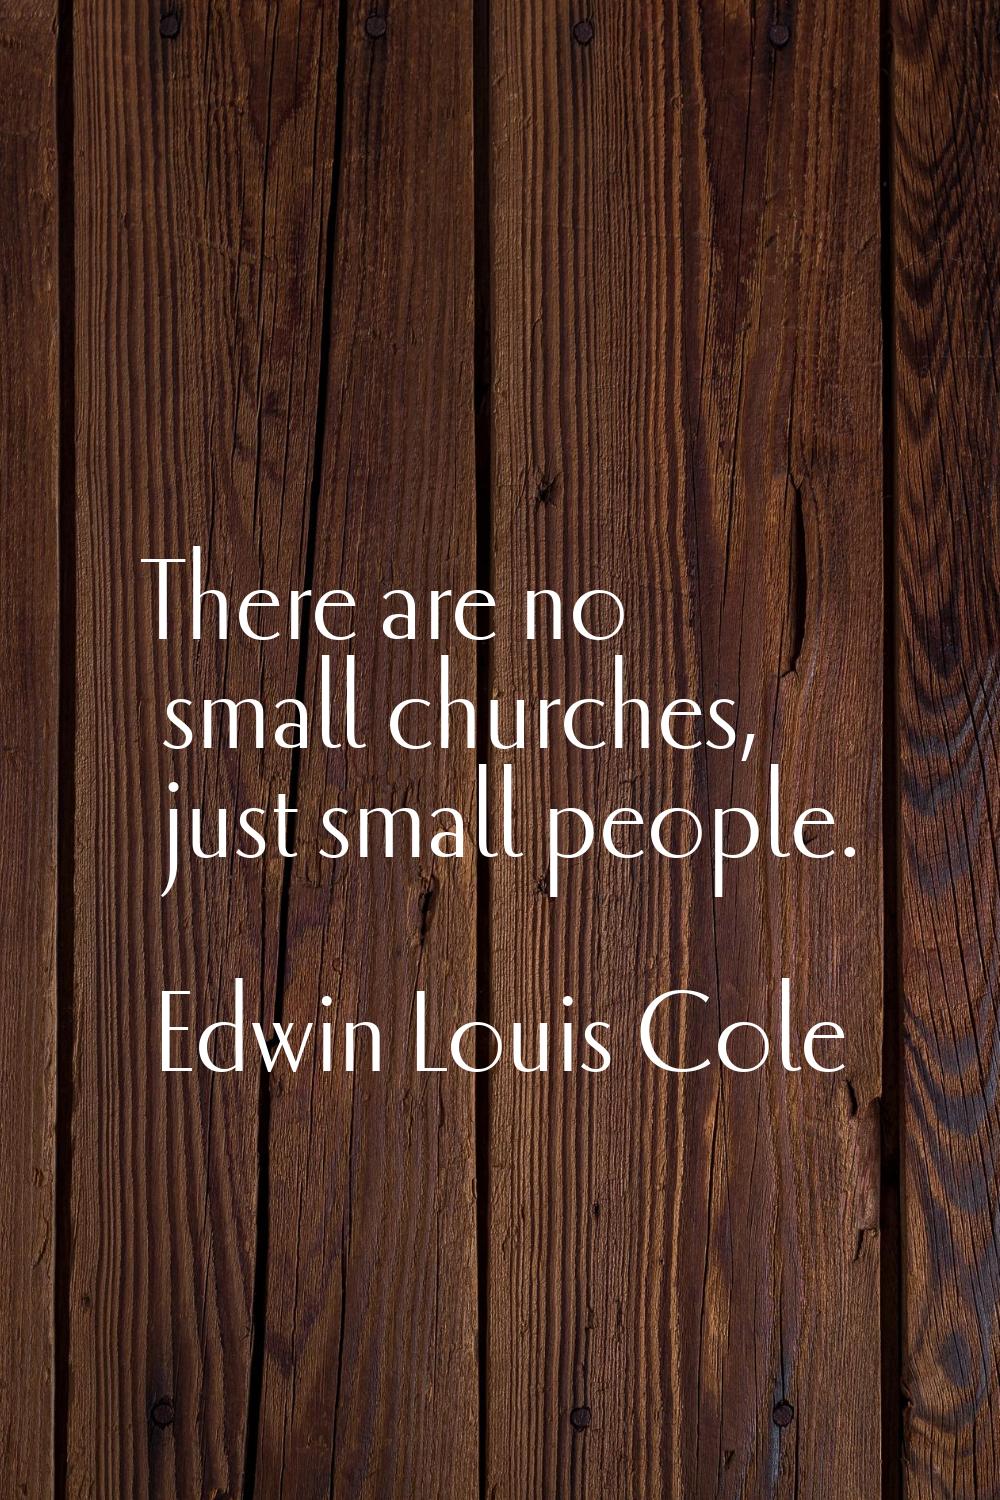 There are no small churches, just small people.